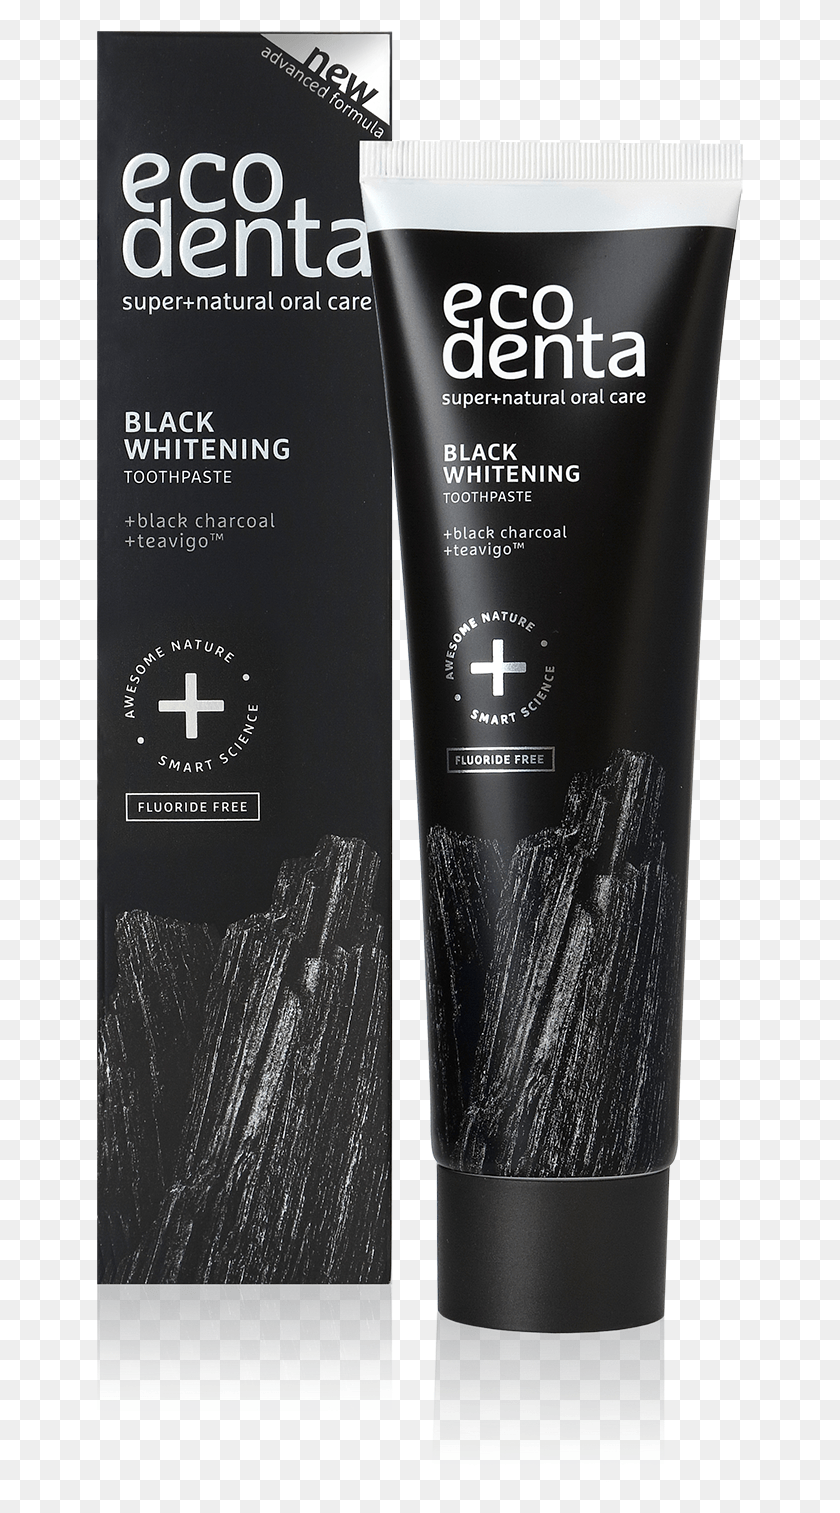 647x1453 Ecodenta Black 1534245303 Ecodenta Extra Black Whitening Toothpaste, Book, Bottle, Cosmetics HD PNG Download